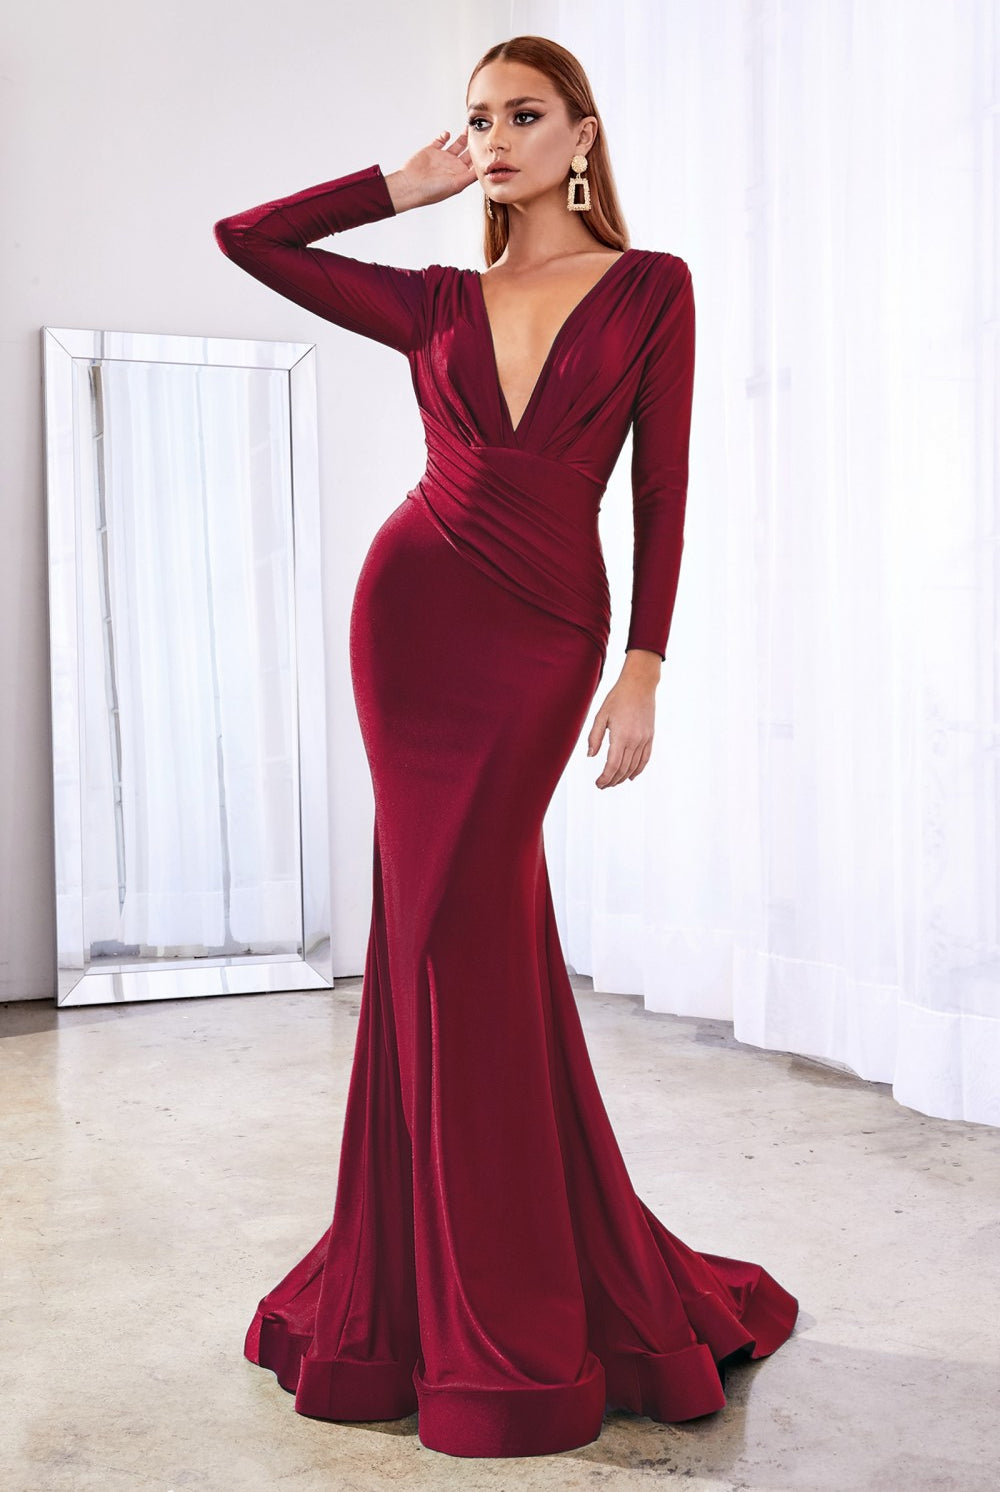 Fitted stretch jersey ball gown with deep V-neck, classic, sophisticated silhouette, and modest long sleeves-smcdress